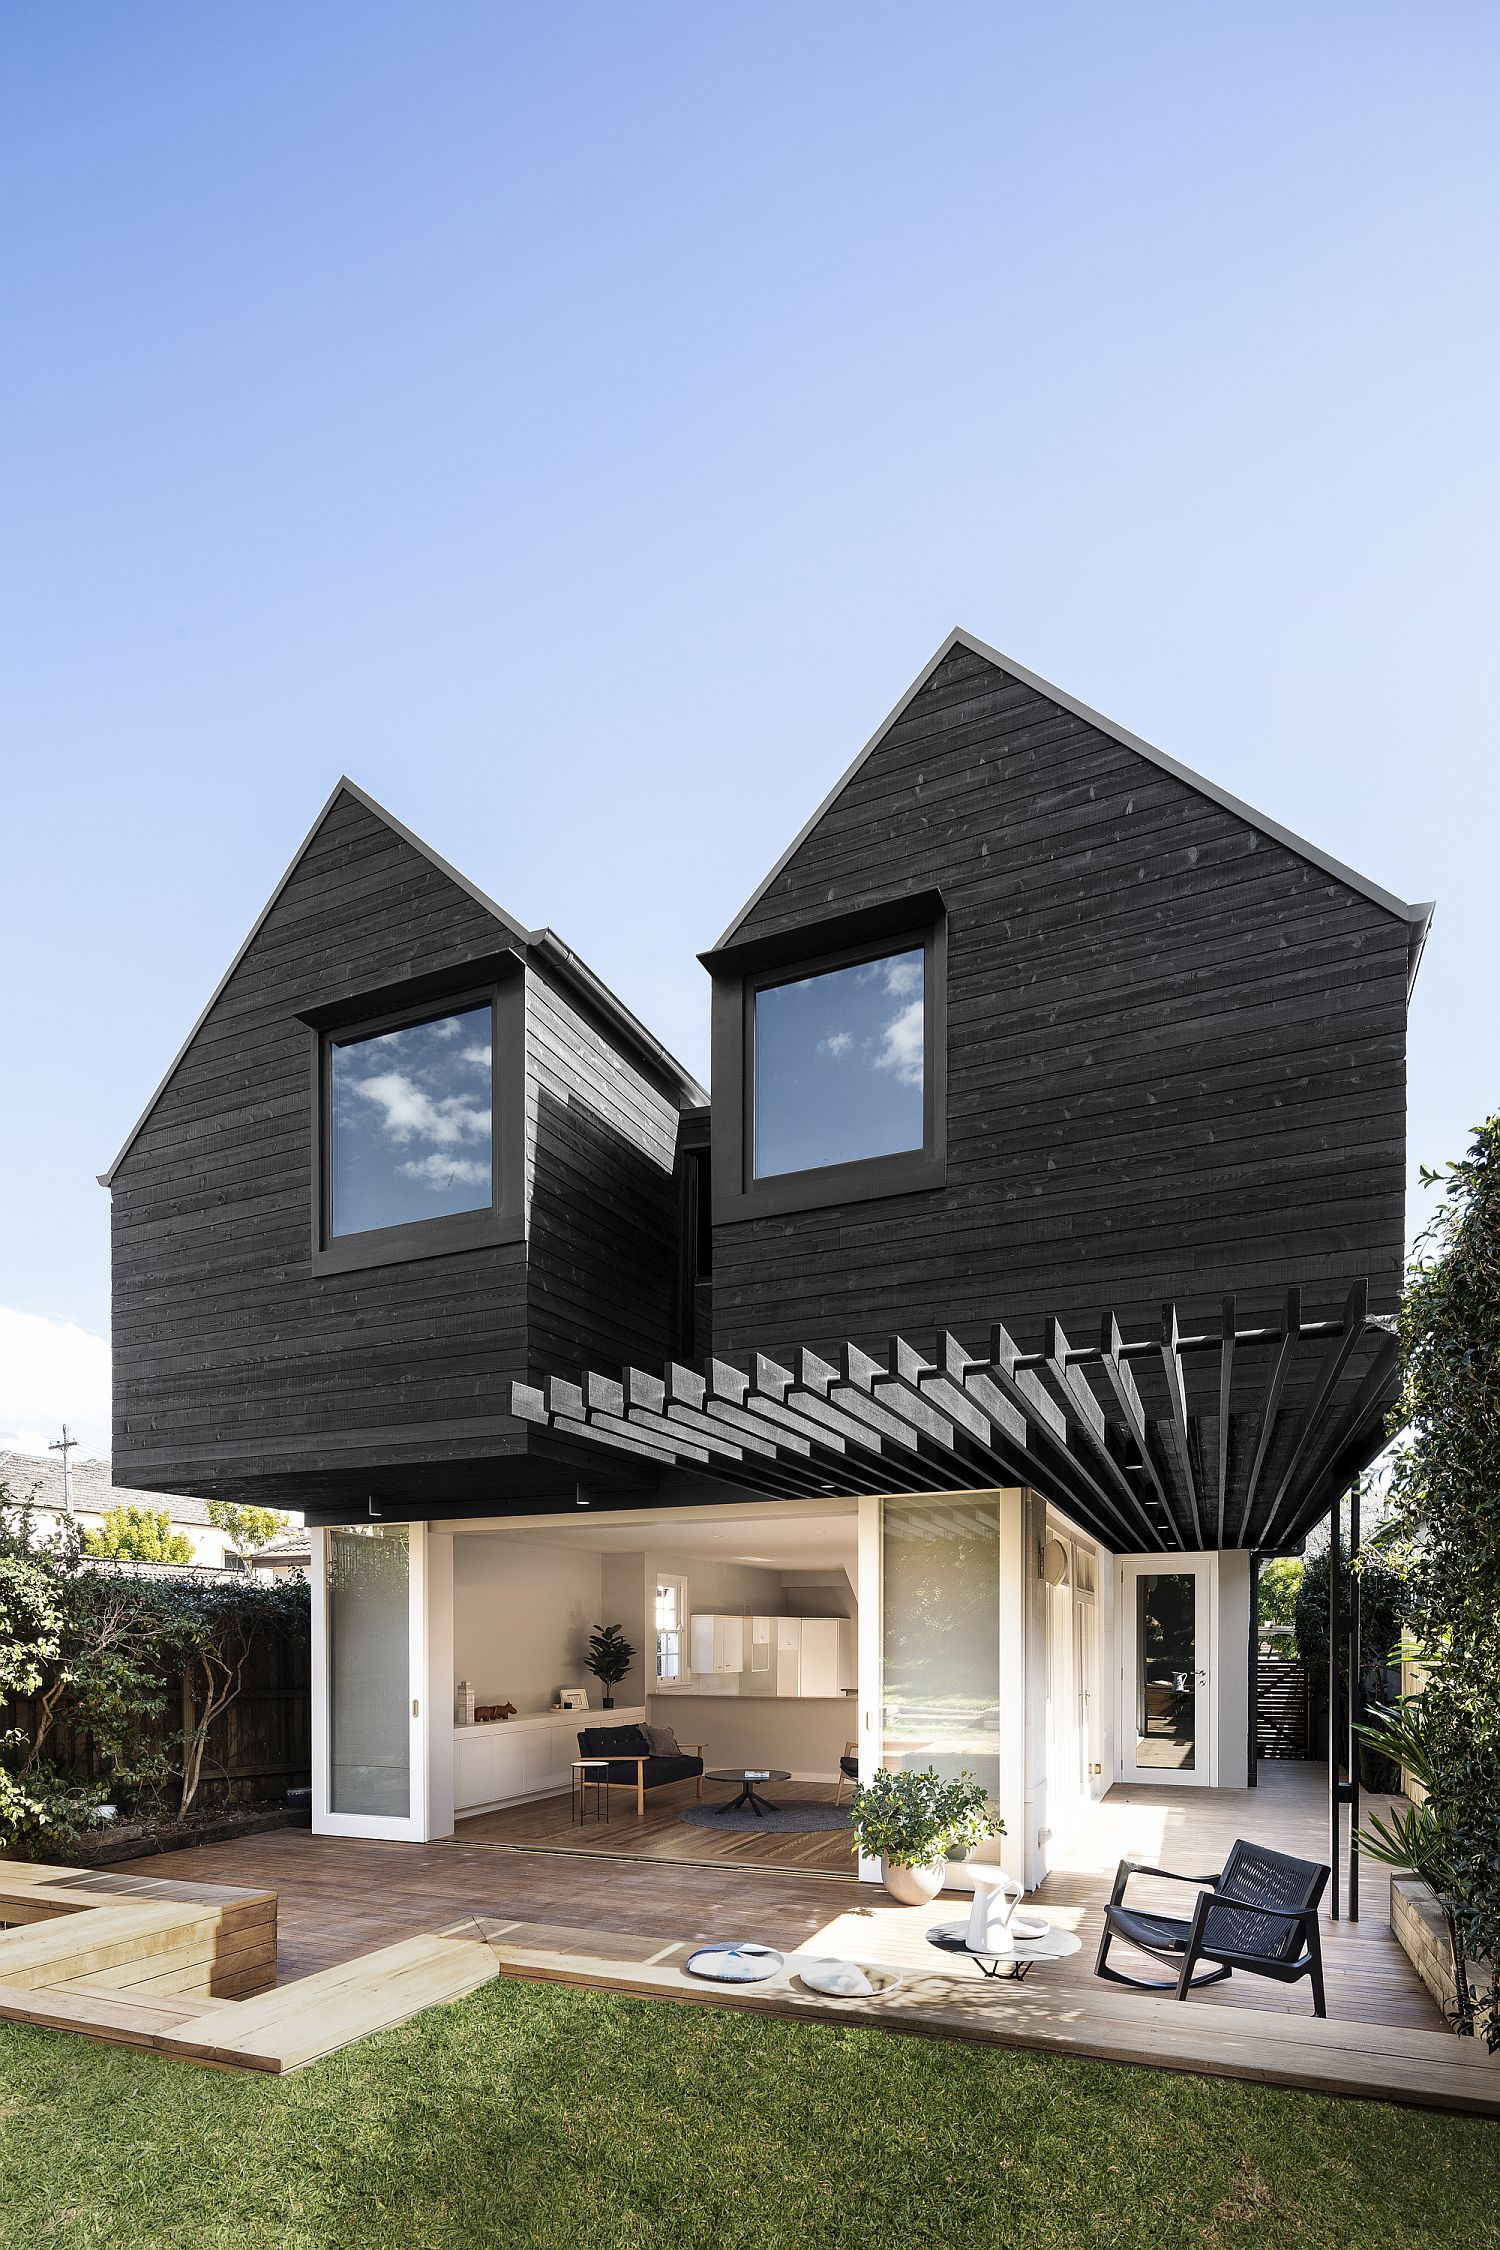 Black Twin Peaks Cottage Style Structure in the Rear Extends Aging Aussie Home